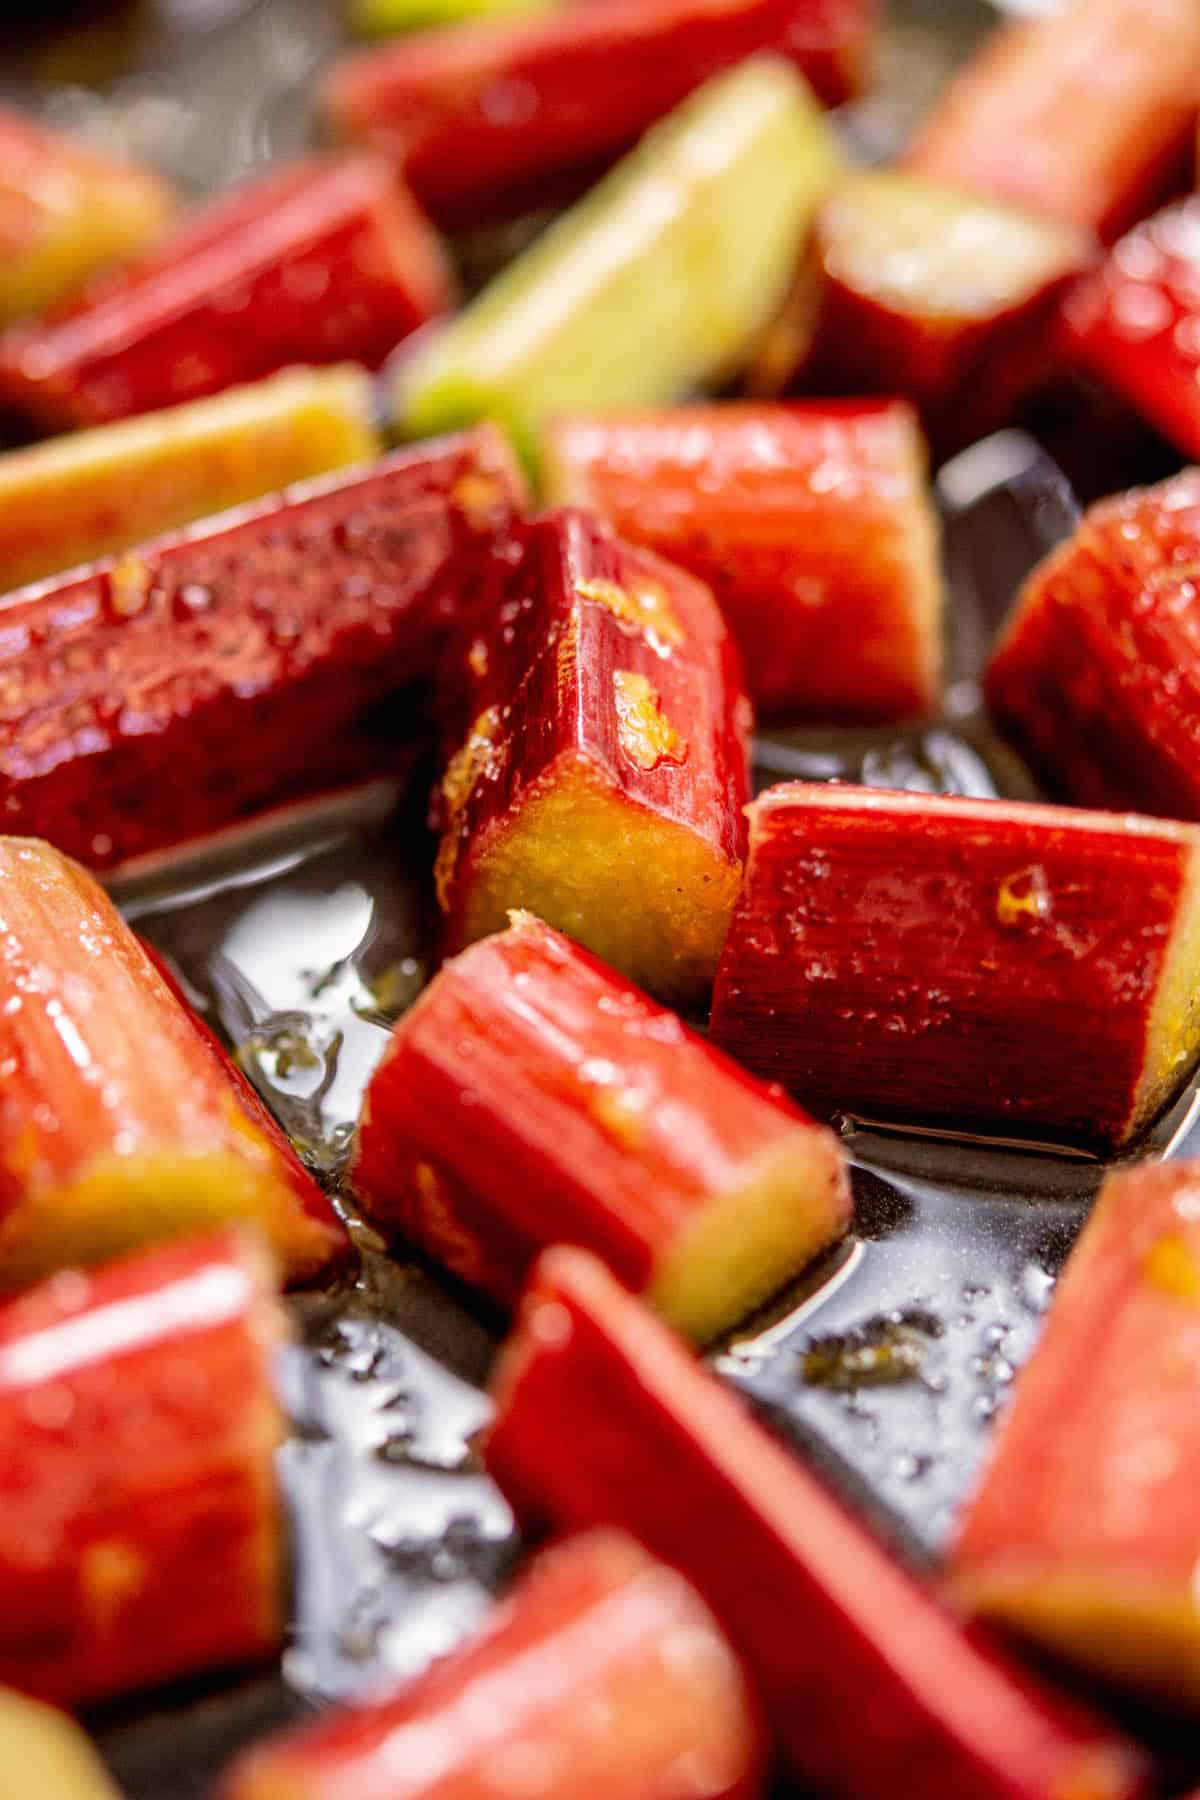 pieces of rhubarb on roasting tray.